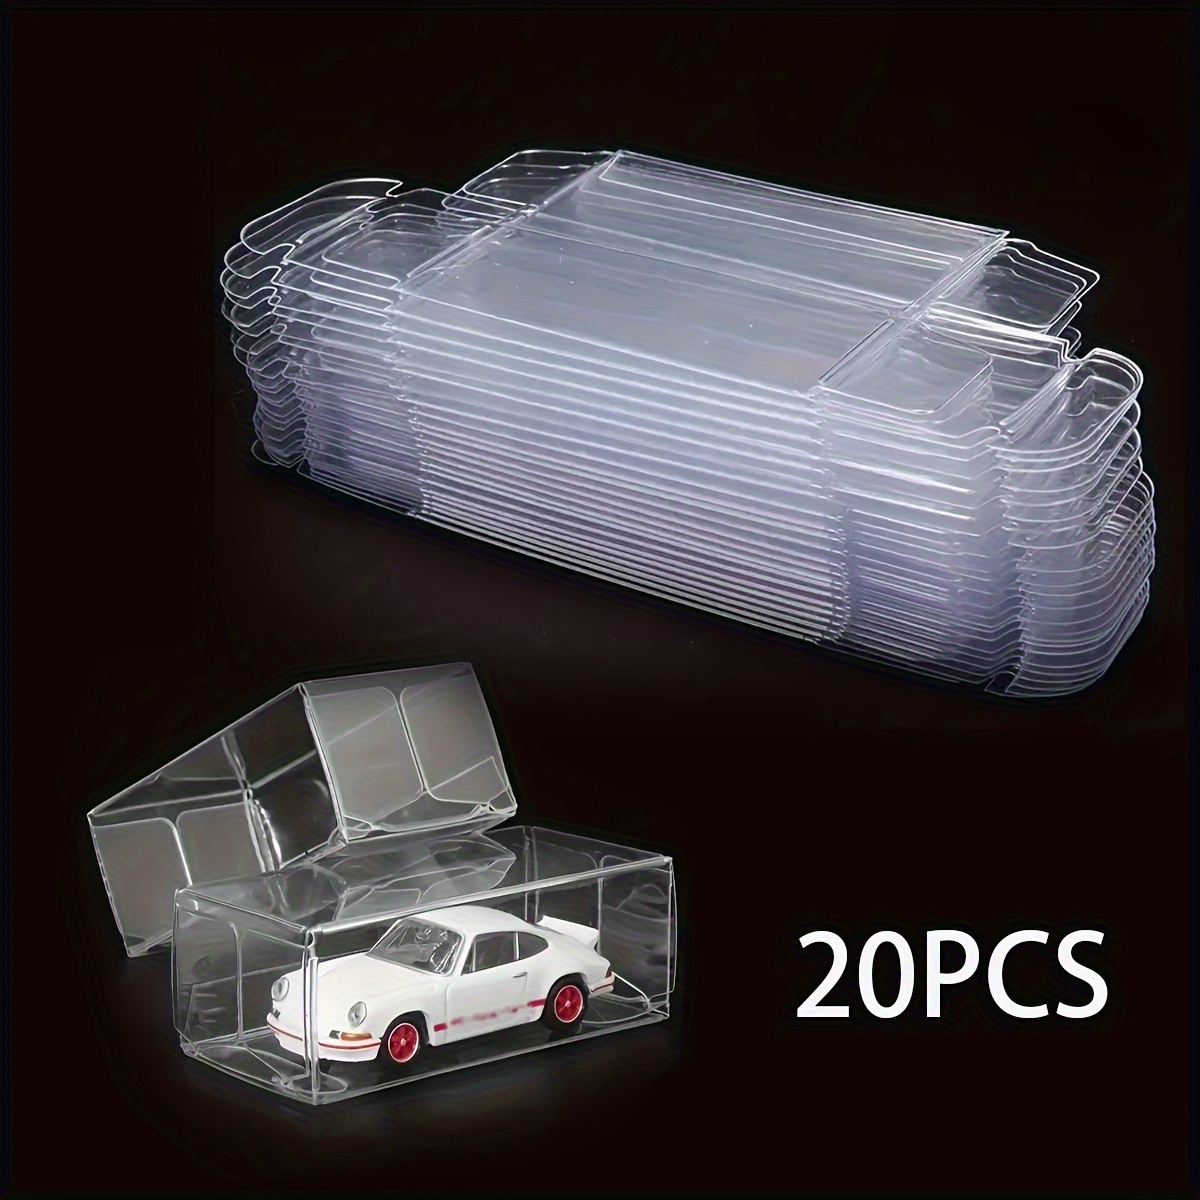 

20pcs Clear Pvc Display Cases For Model Cars, Transparent Protective Boxes, Contemporary Plastic Storage Solution For Collectibles, Suitable For Room And Office Decor